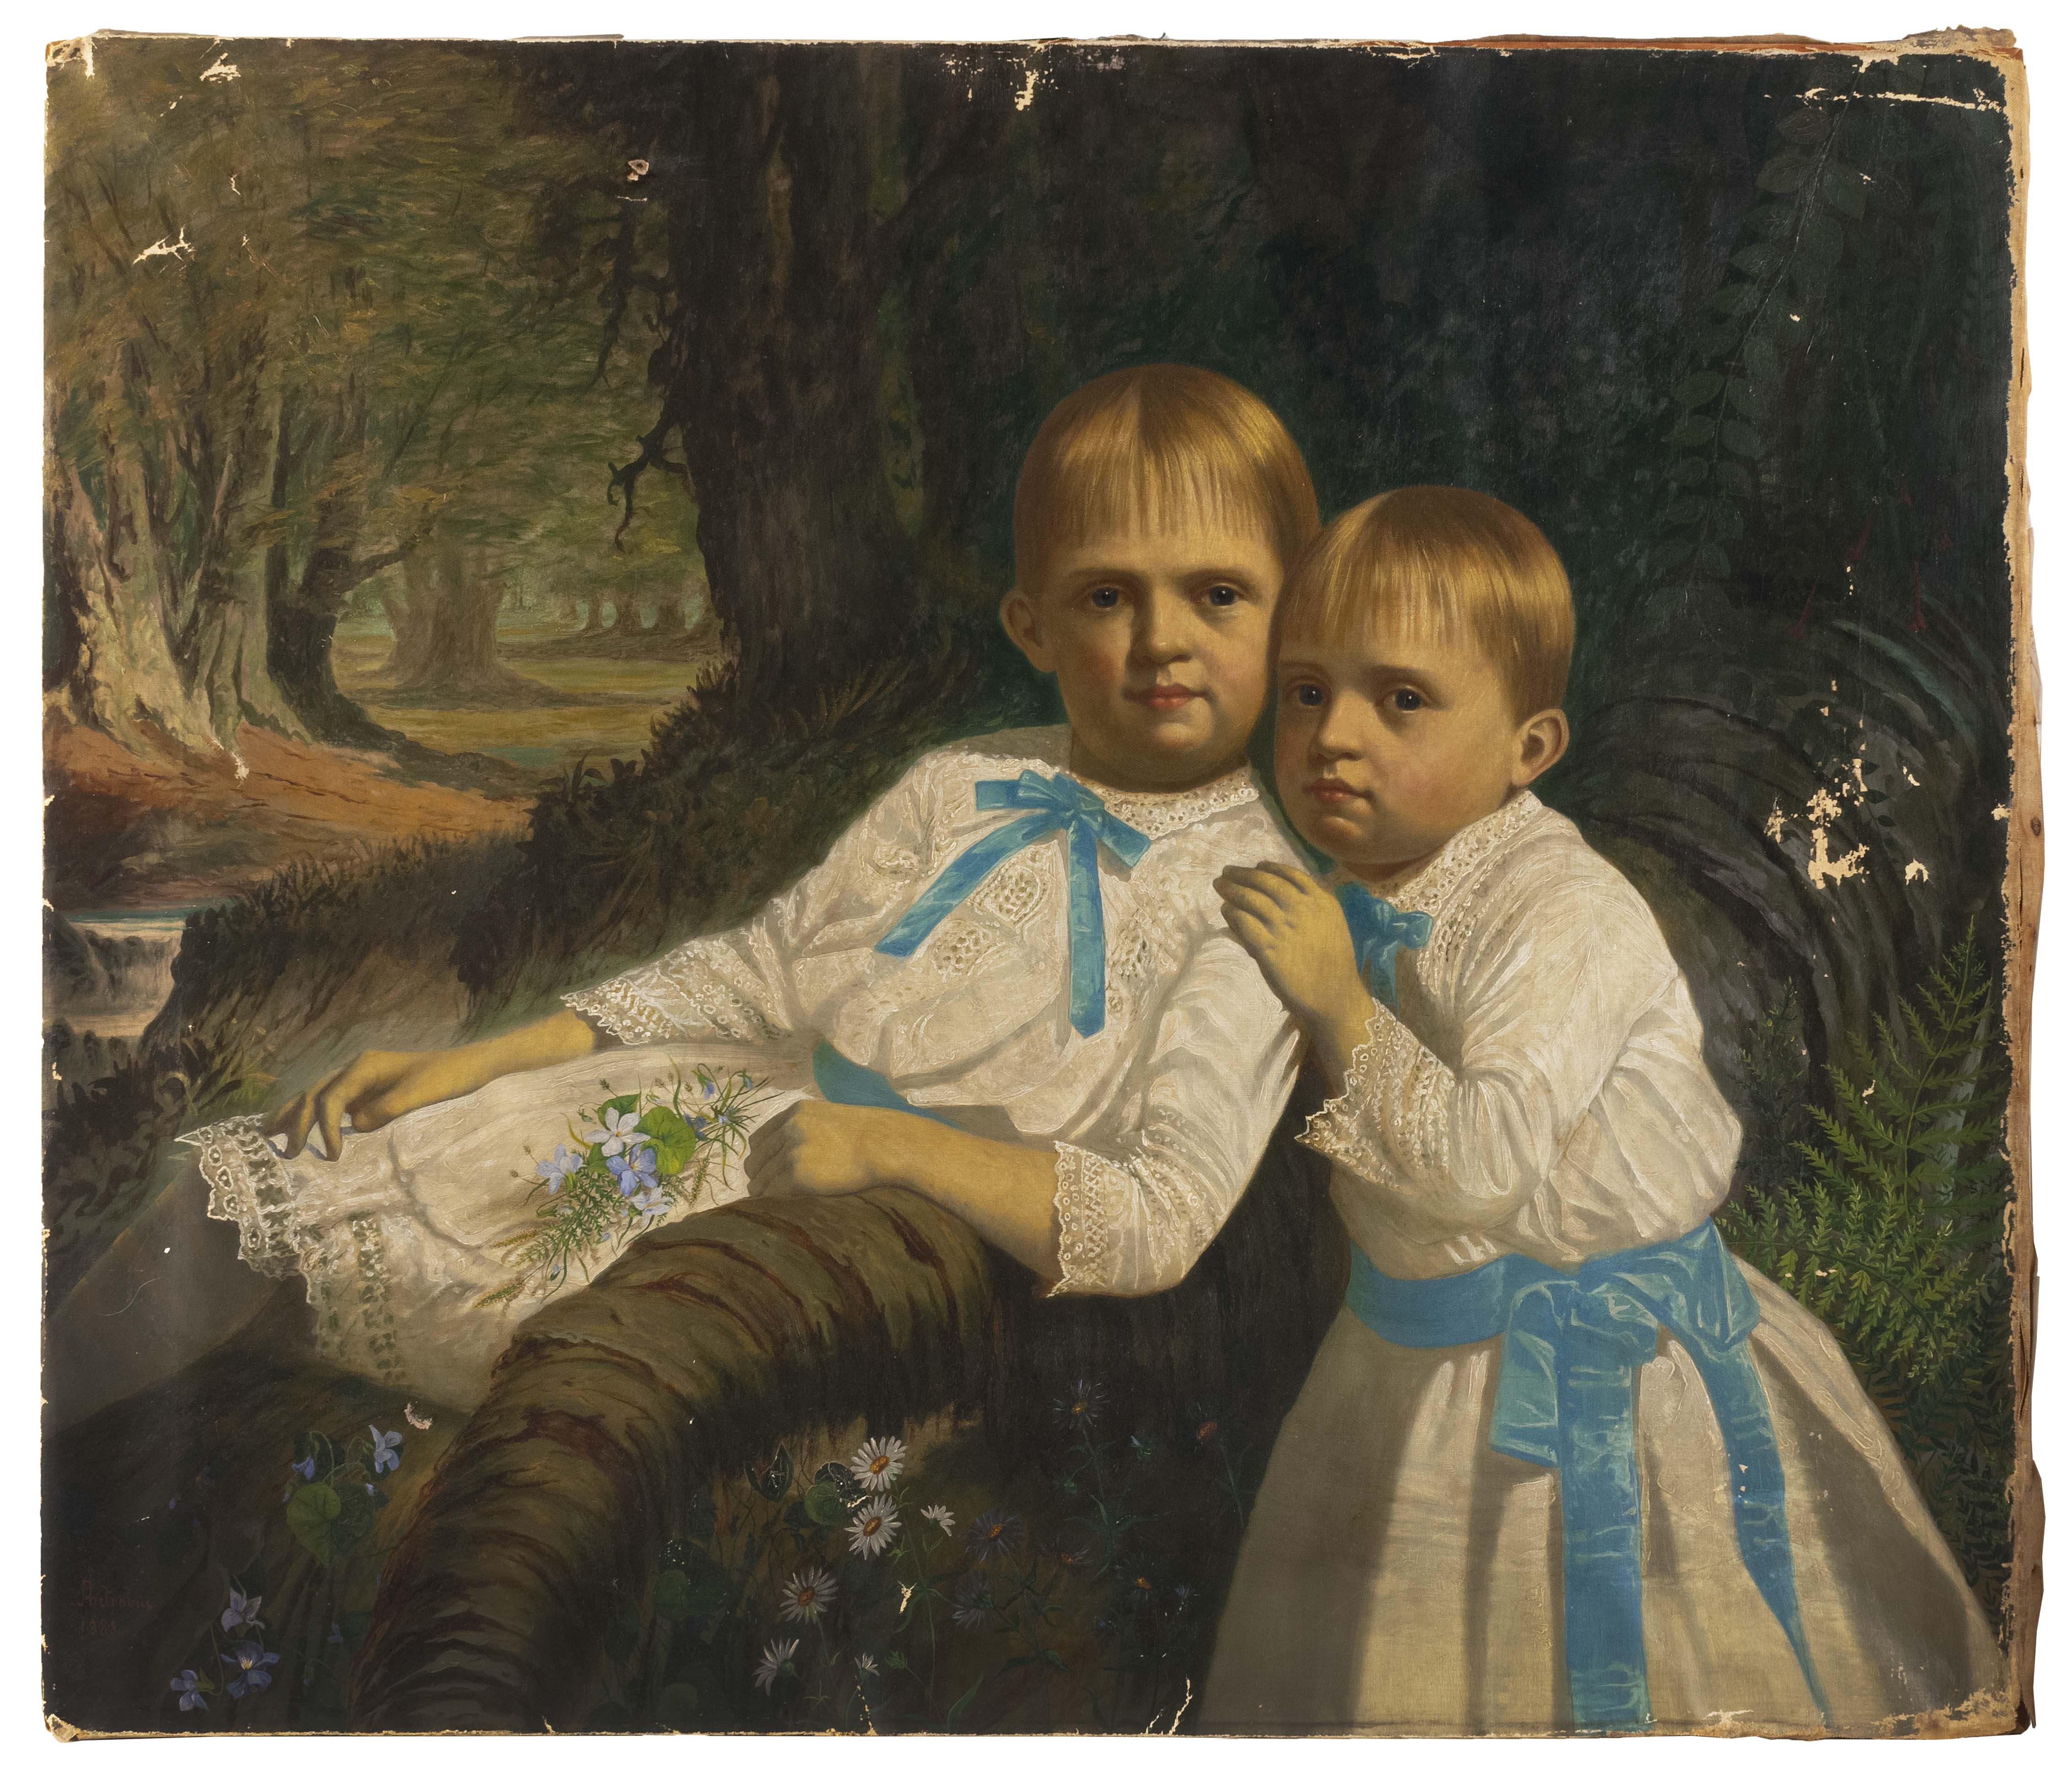 Portrait of two children in the woods by John Antrobus, 1885